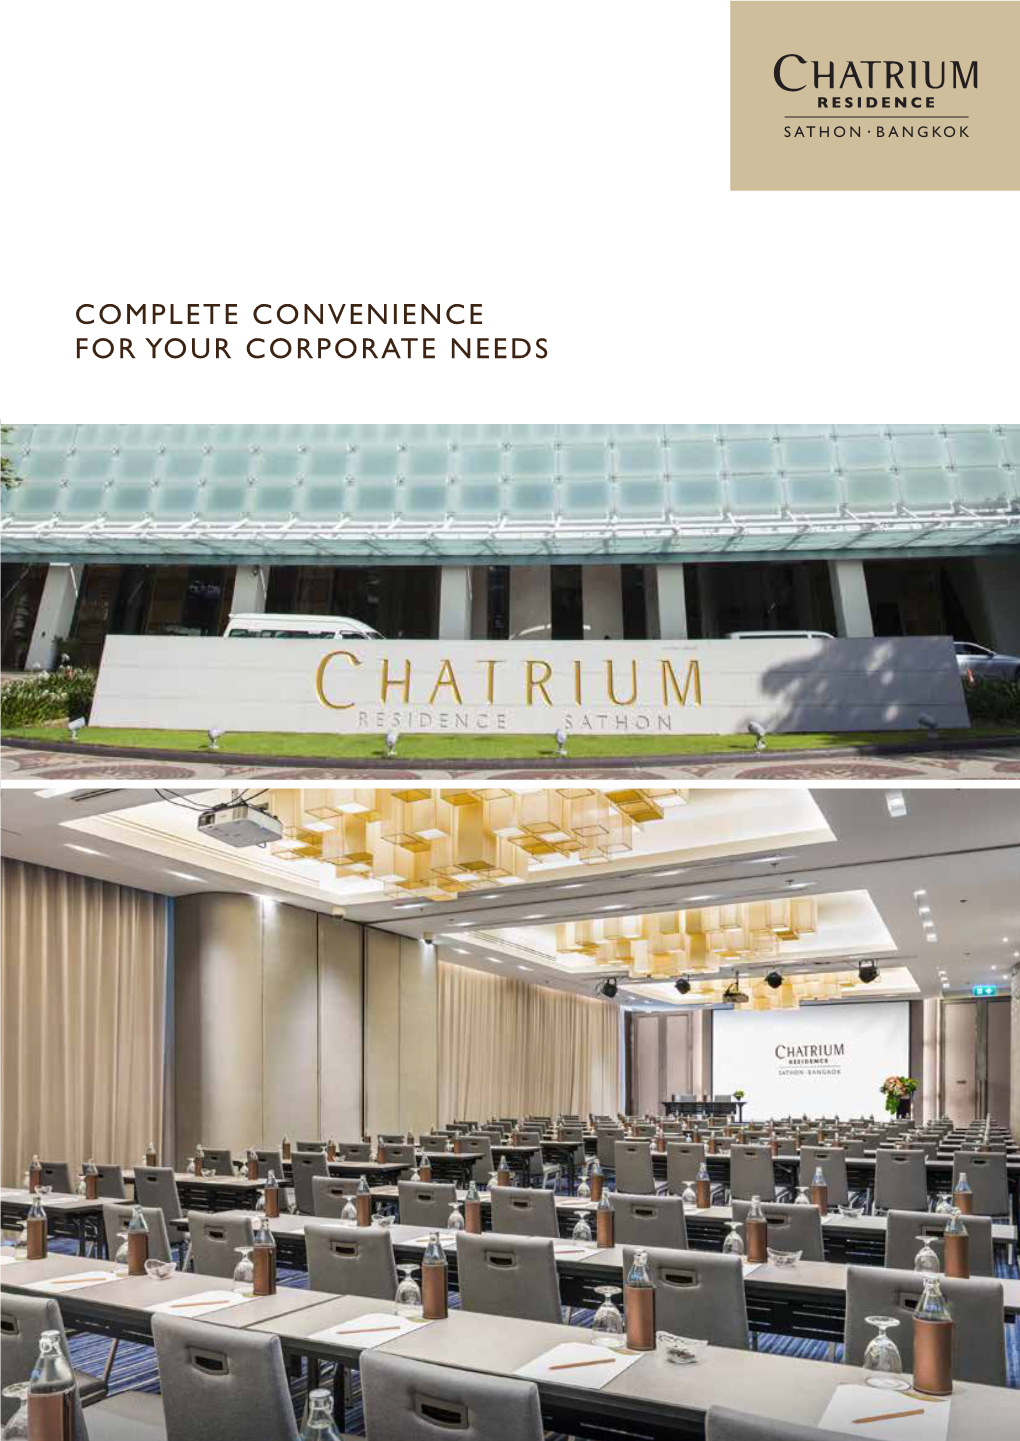 COMPLETE CONVENIENCE for YOUR CORPORATE NEEDS at Chatrium Residence Sathon Bangkok, Meetings and Events Are Conveniently Close to Bangkok’S Central Business District